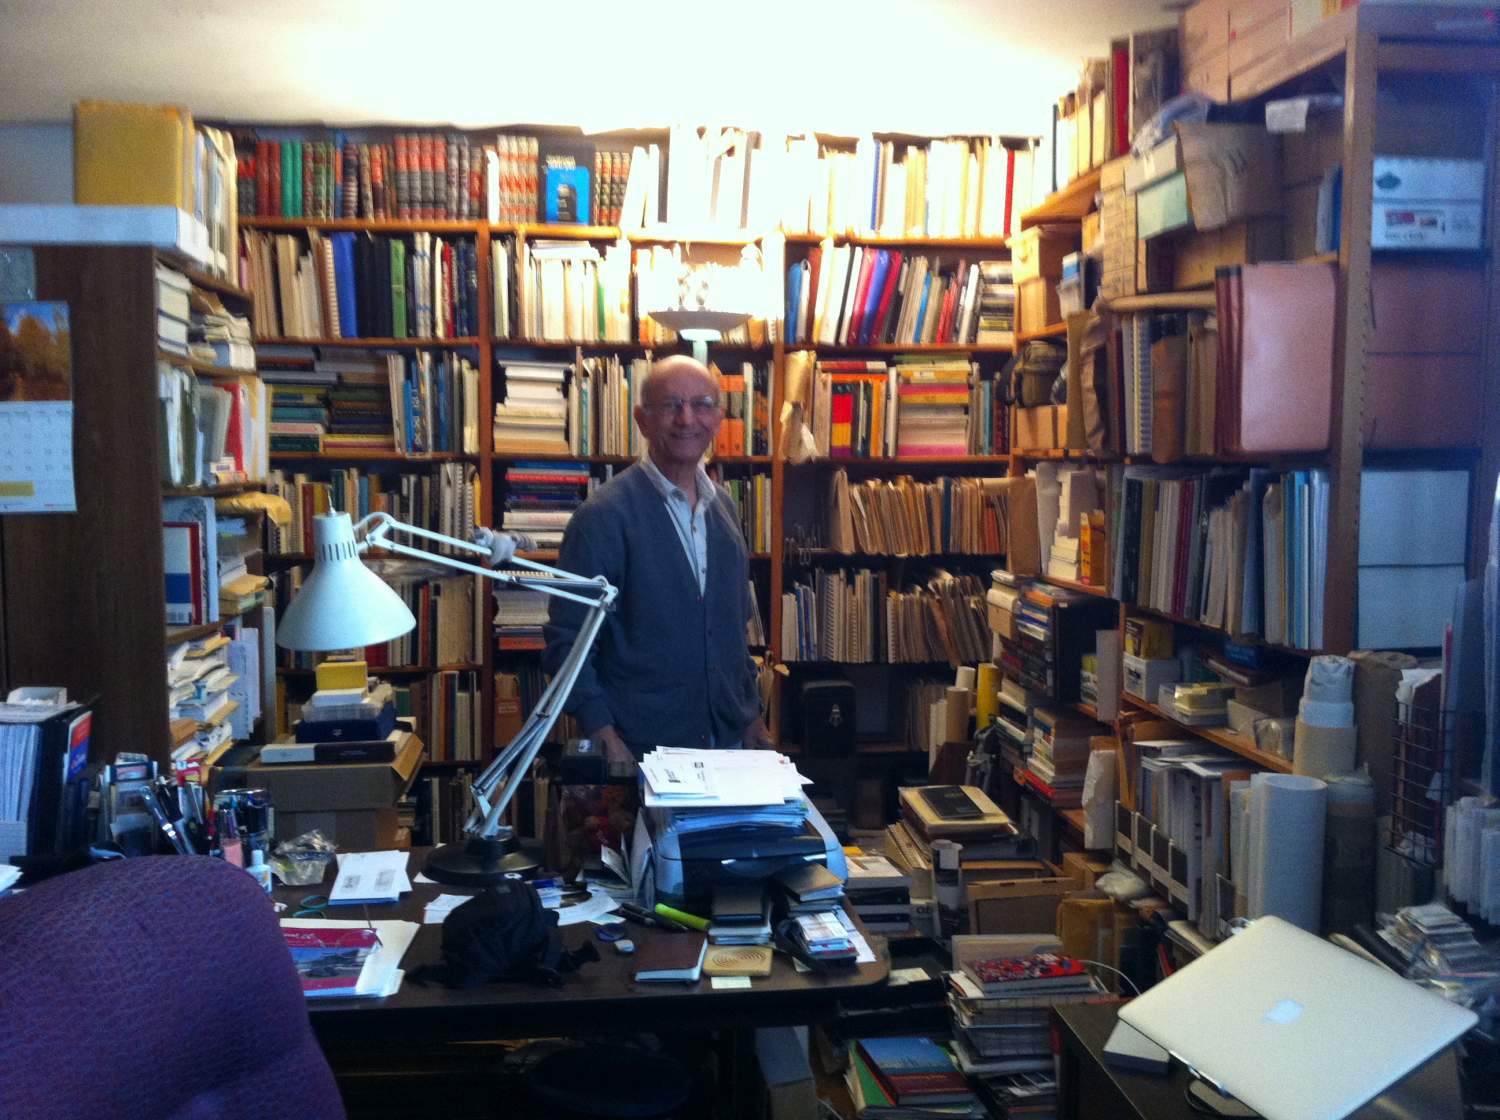 Besim Hakim in his office library